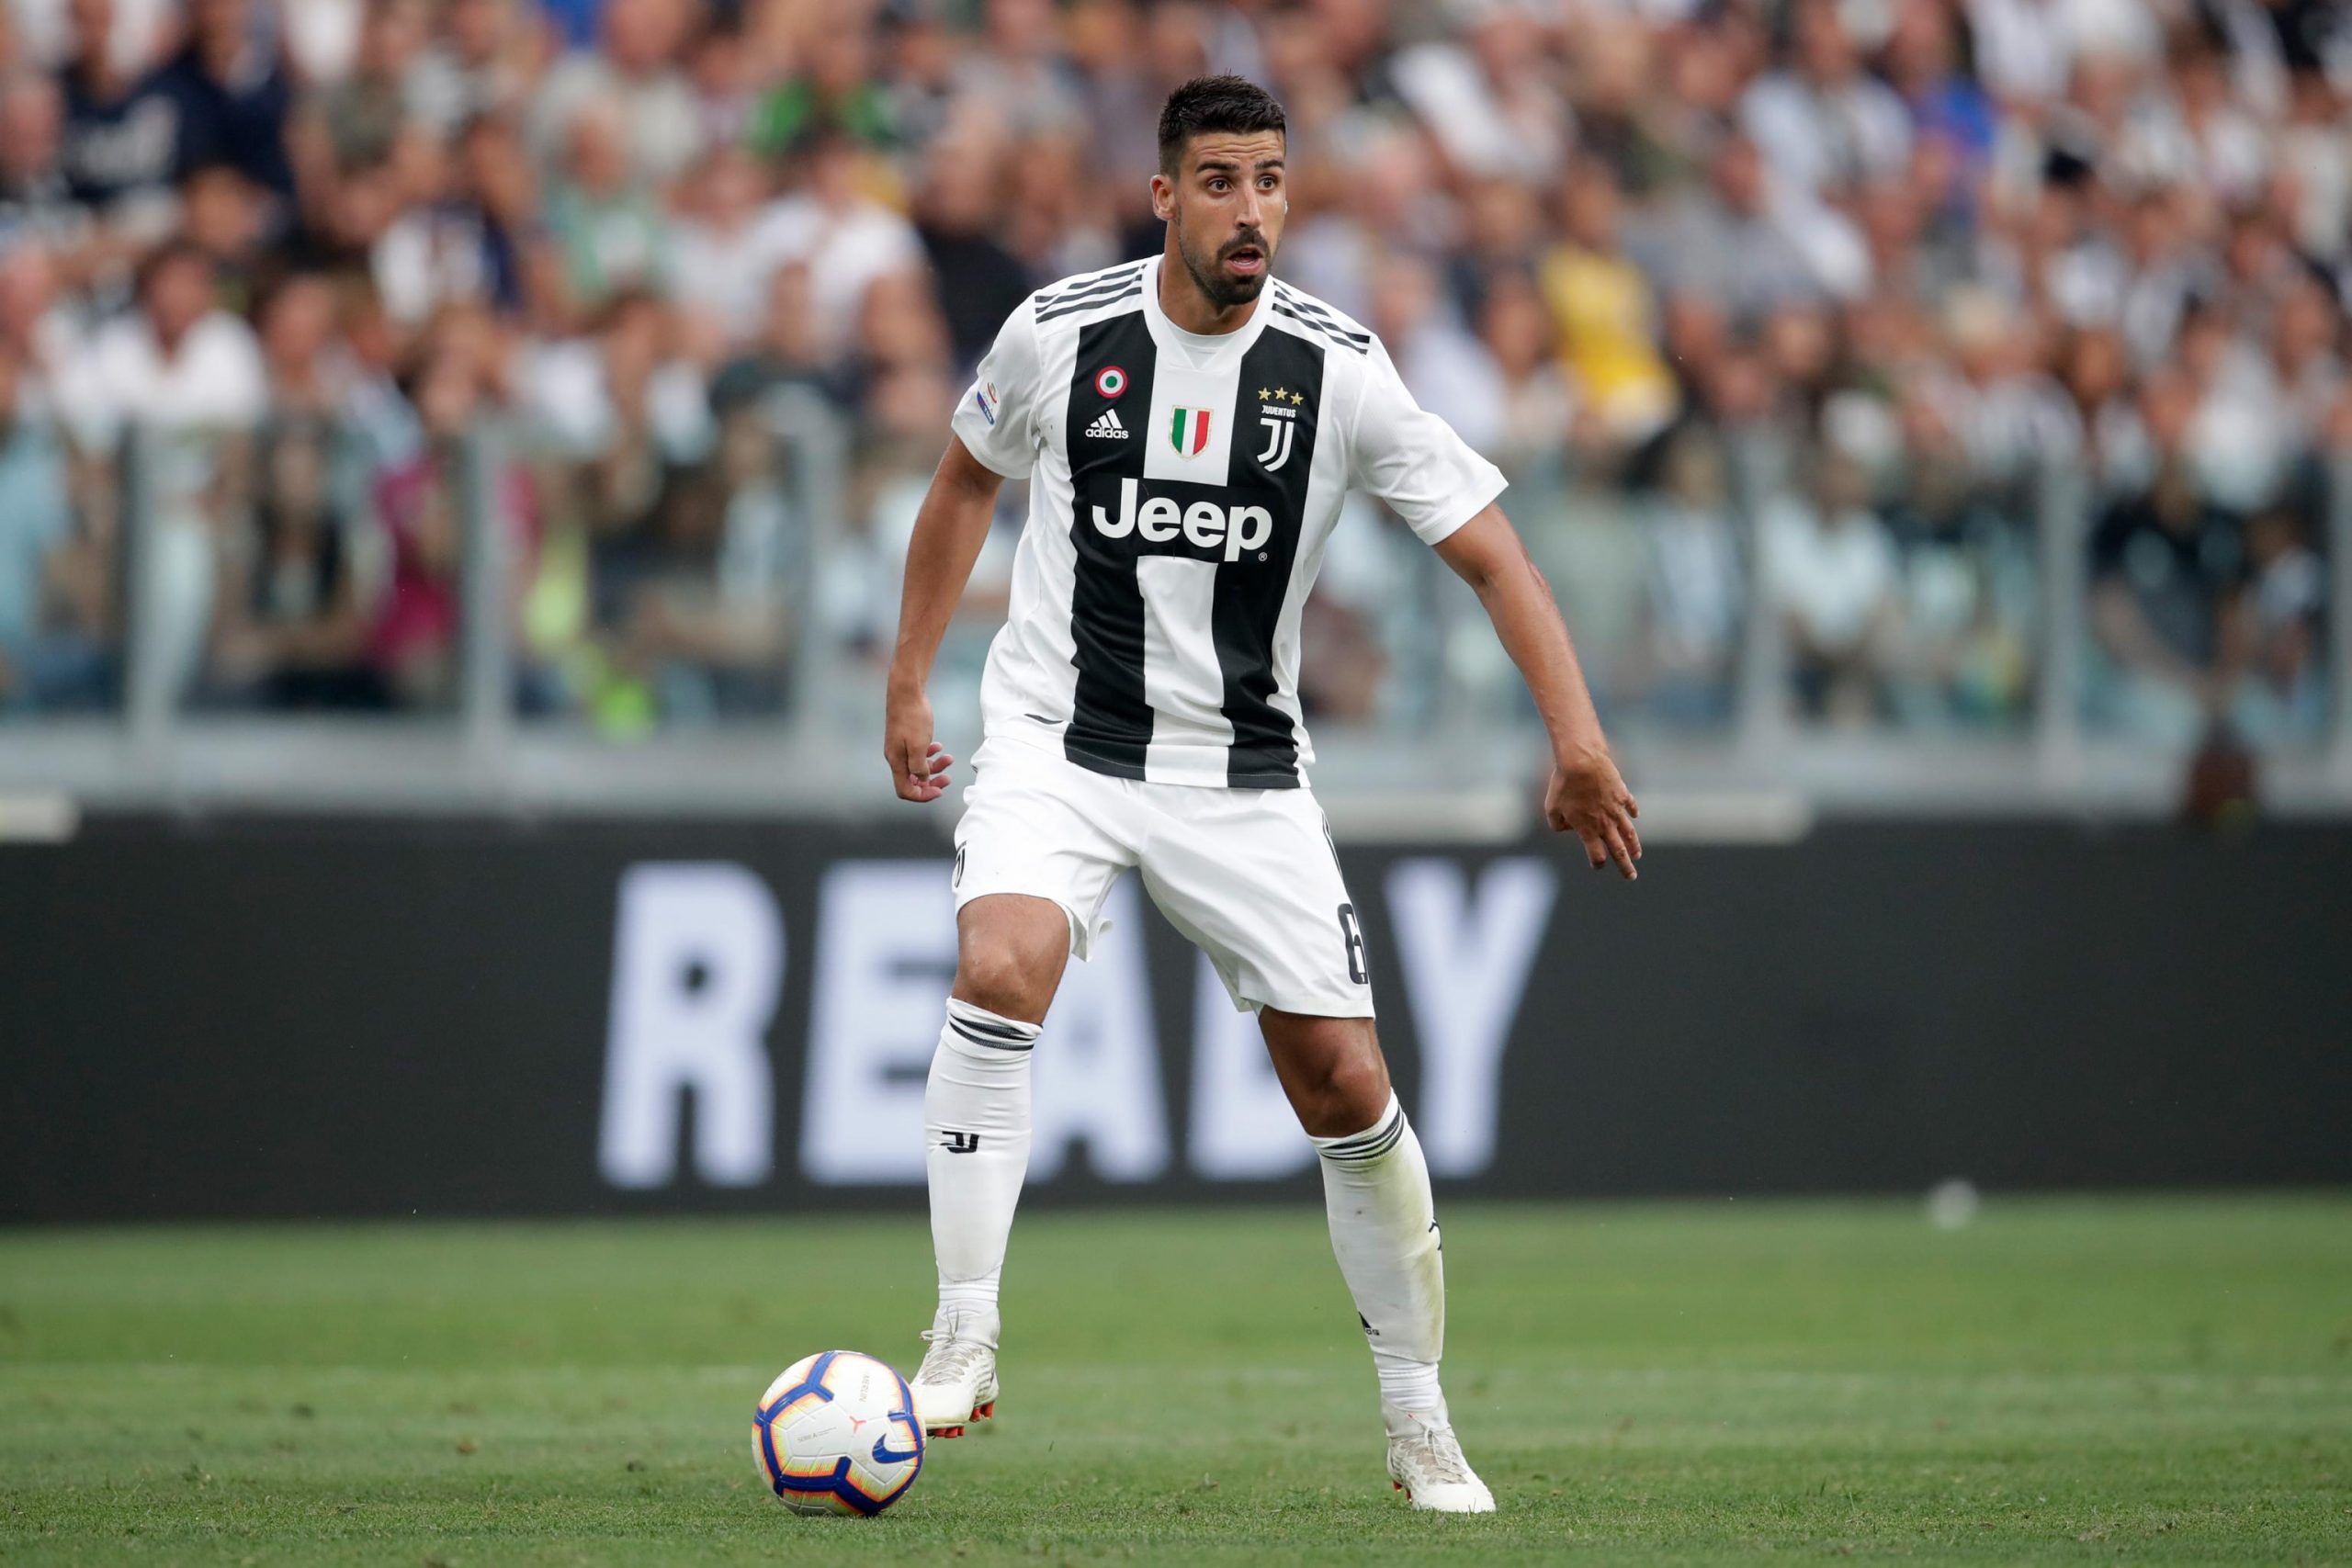 Tottenham Hotspur are facing competition from Everton in their efforts to land Sami Khedira in the January transfer window.